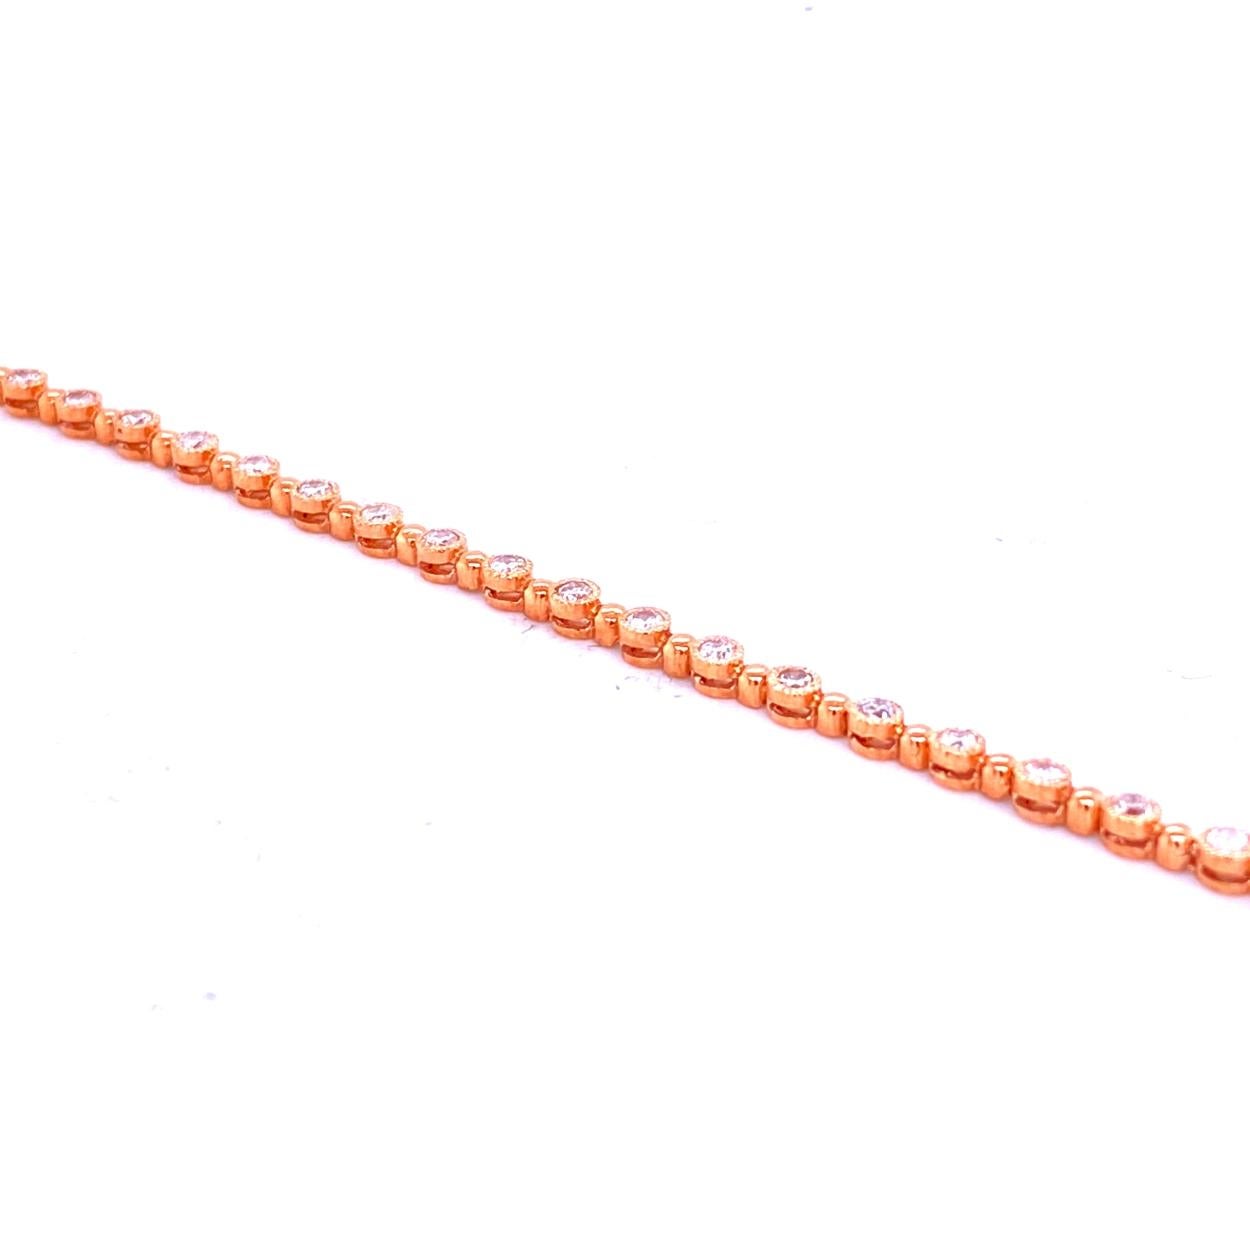 This Diamond Bracelet consists of 36 Links Bezel Set 1.8 mm Round Brilliant diamonds. The bracelet is made in 14K Gold with Milgrained edges for maximum brilliance.  The bracelet comes with a built in lock for safety.
Metal: 14K Rose Gold
Total